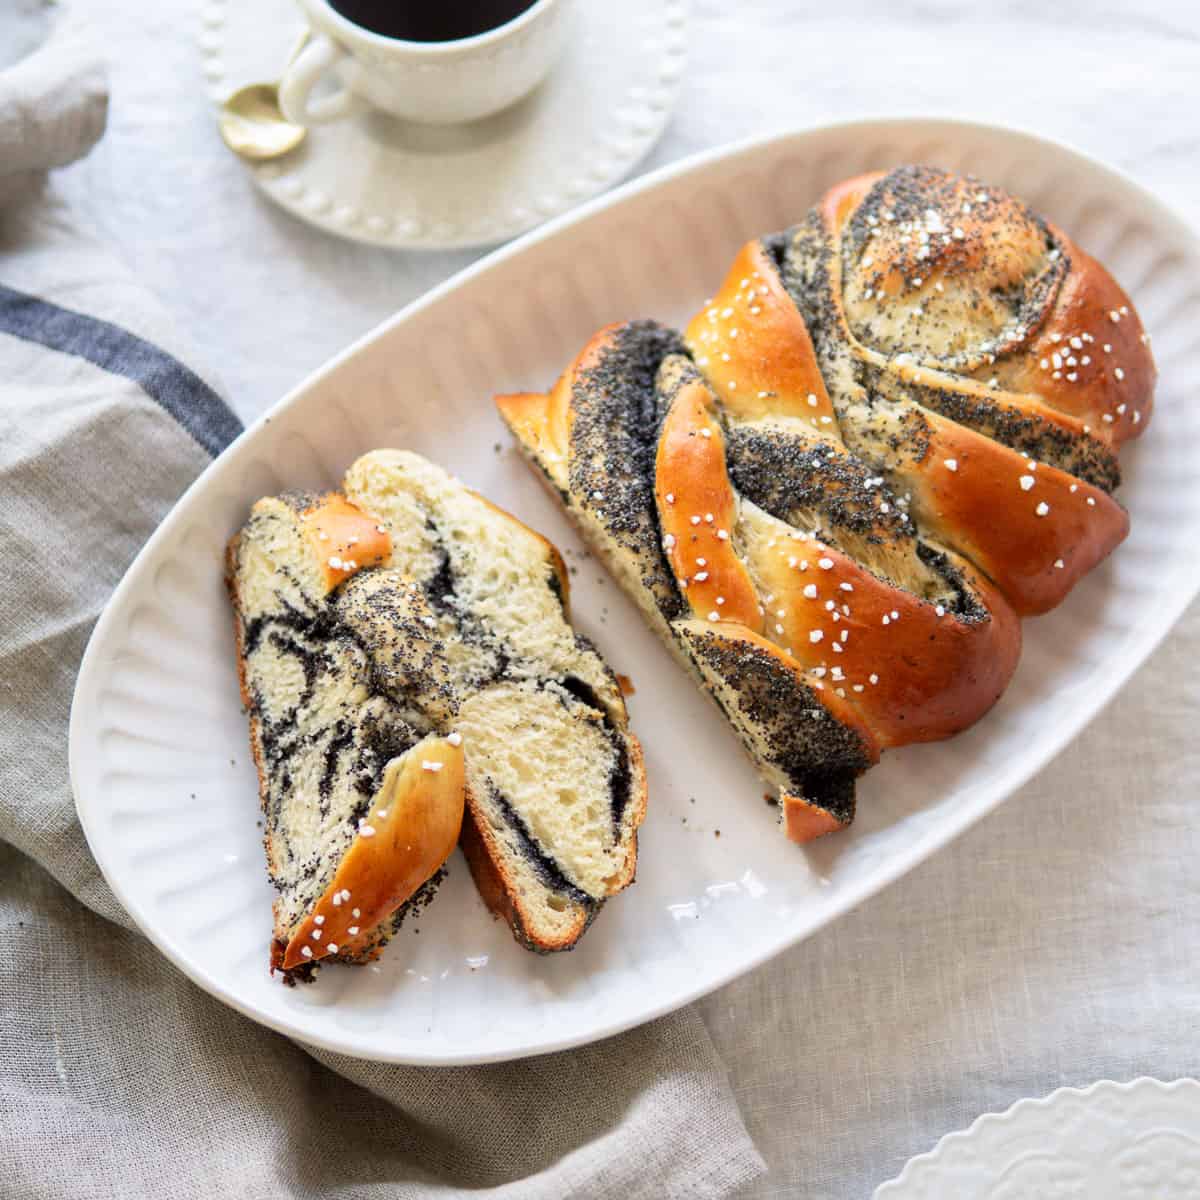 Braided bread with poppy seed filling cut into slices and a cup of coffee.